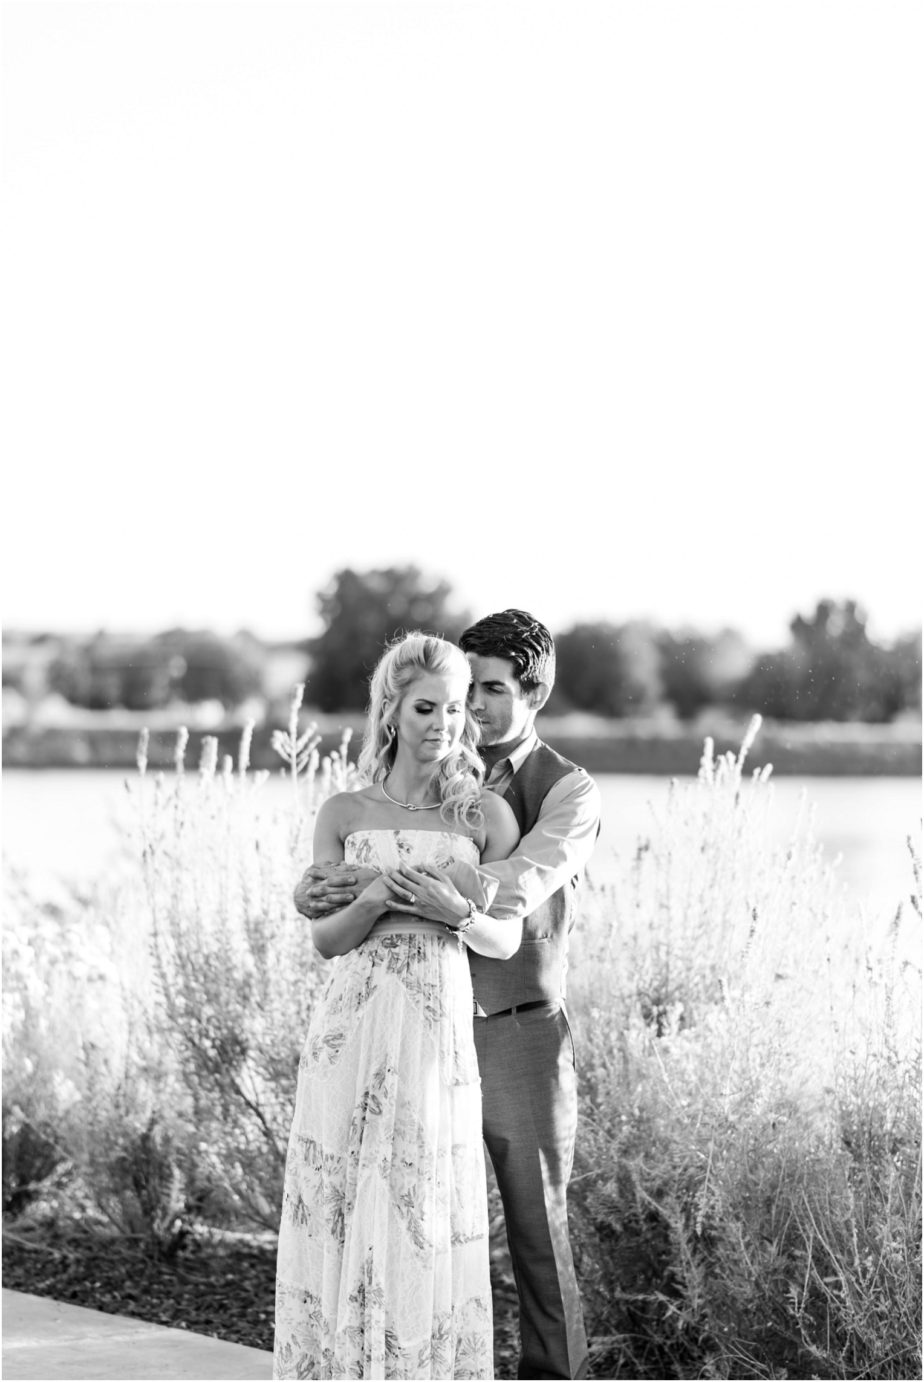 Clover Island Anniversary Session Kennewick WA Couple in the grass by the lighthouse